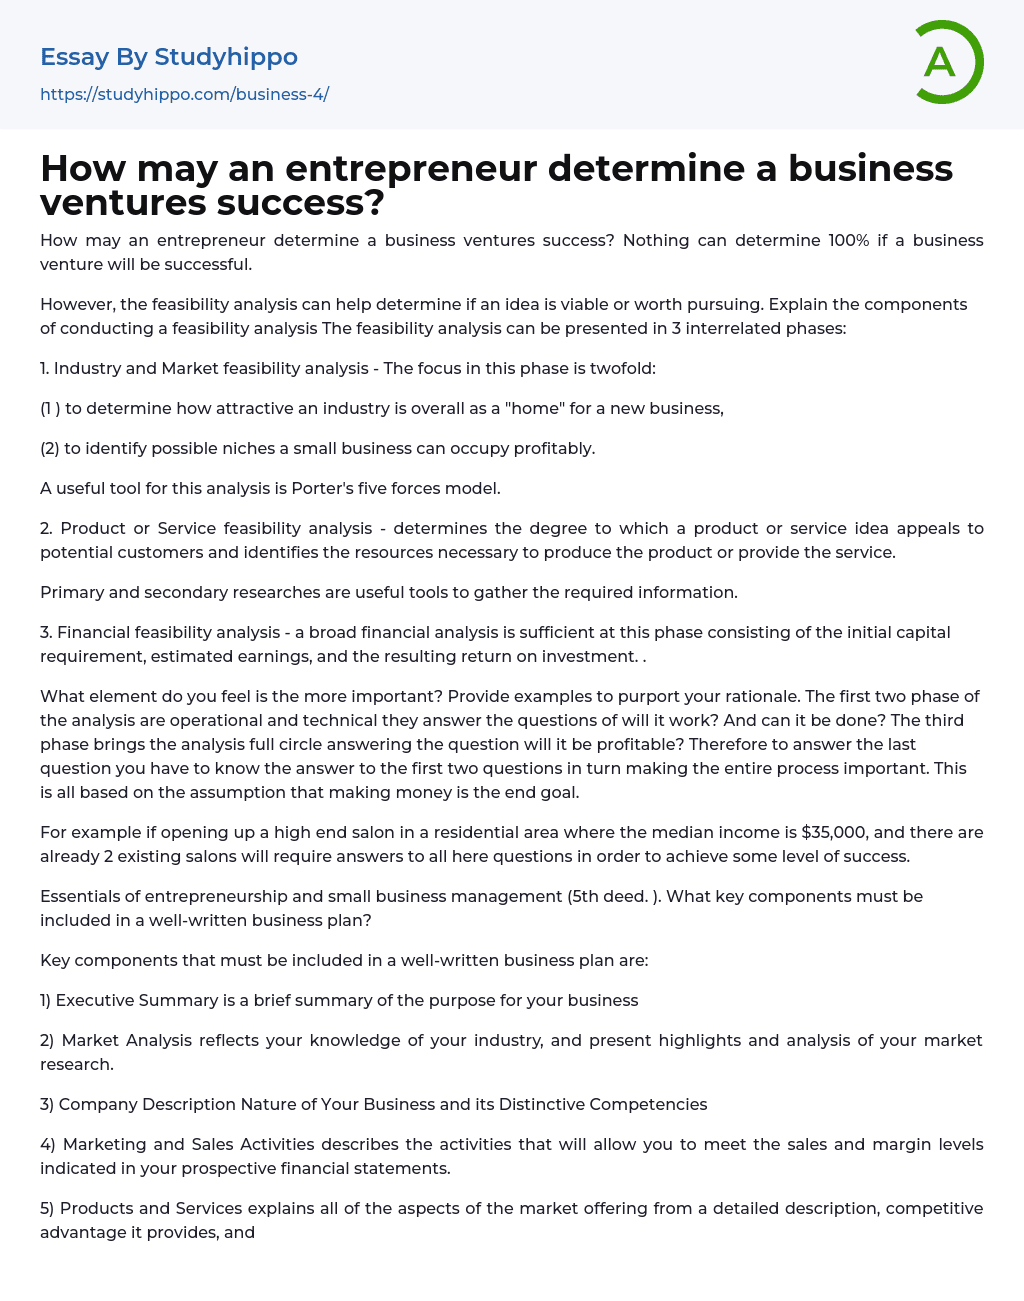 How may an entrepreneur determine a business ventures success? Essay Example